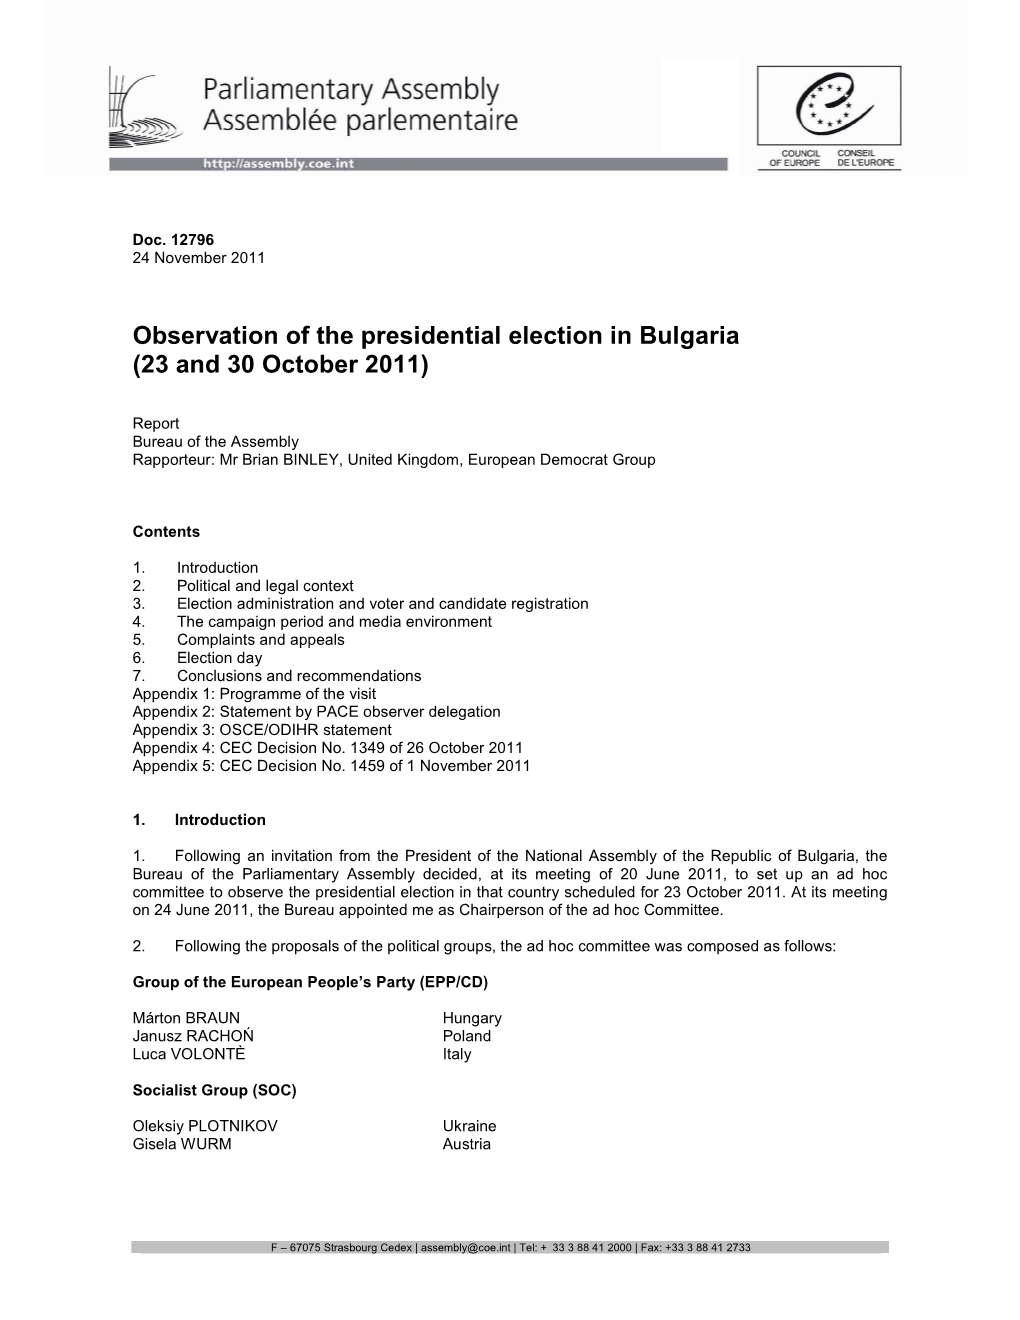 Observation of the Presidential Election in Bulgaria (23 and 30 October 2011)